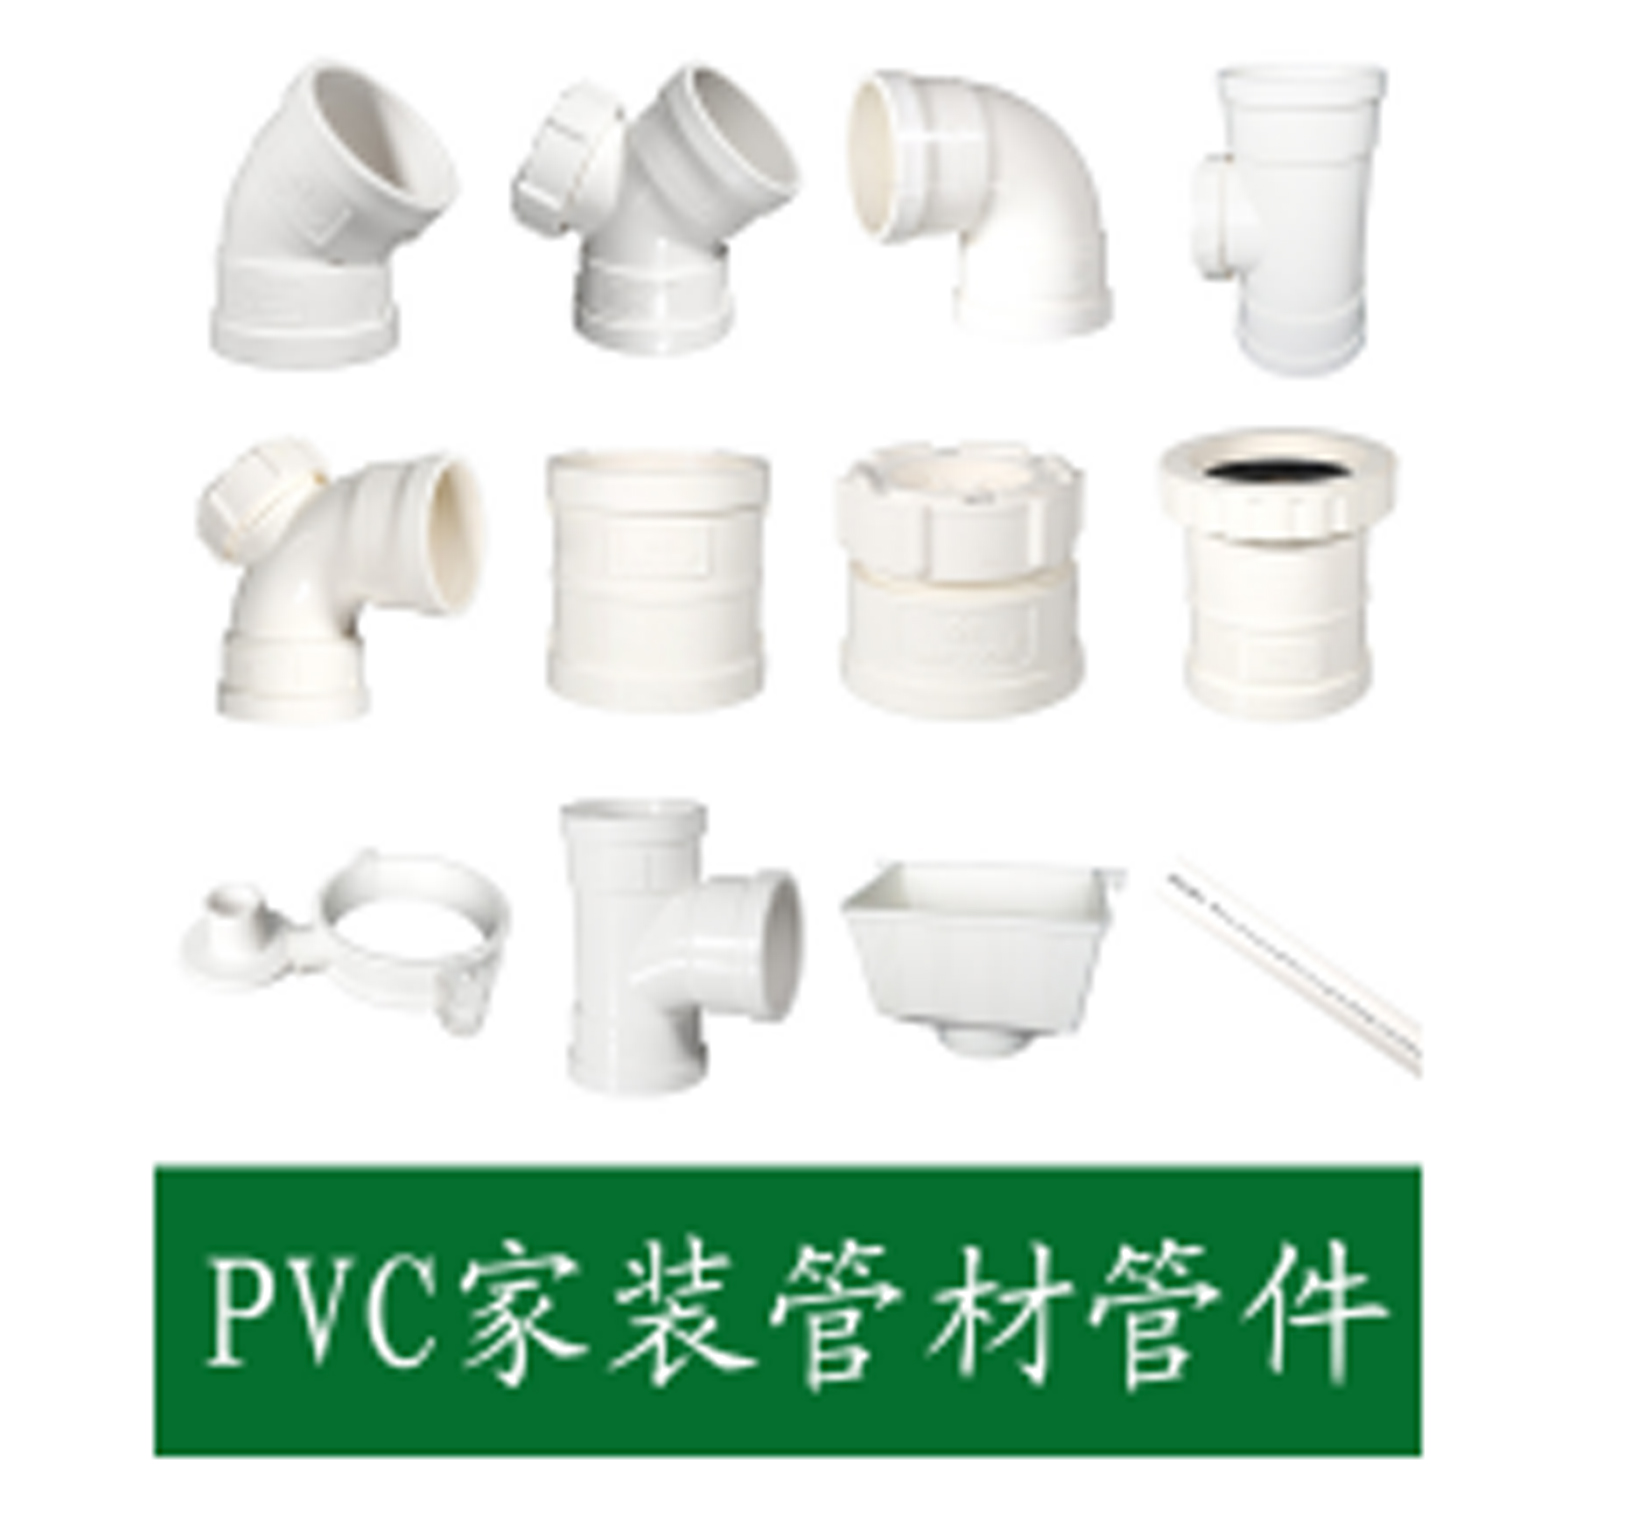 PVC pipes and fittings